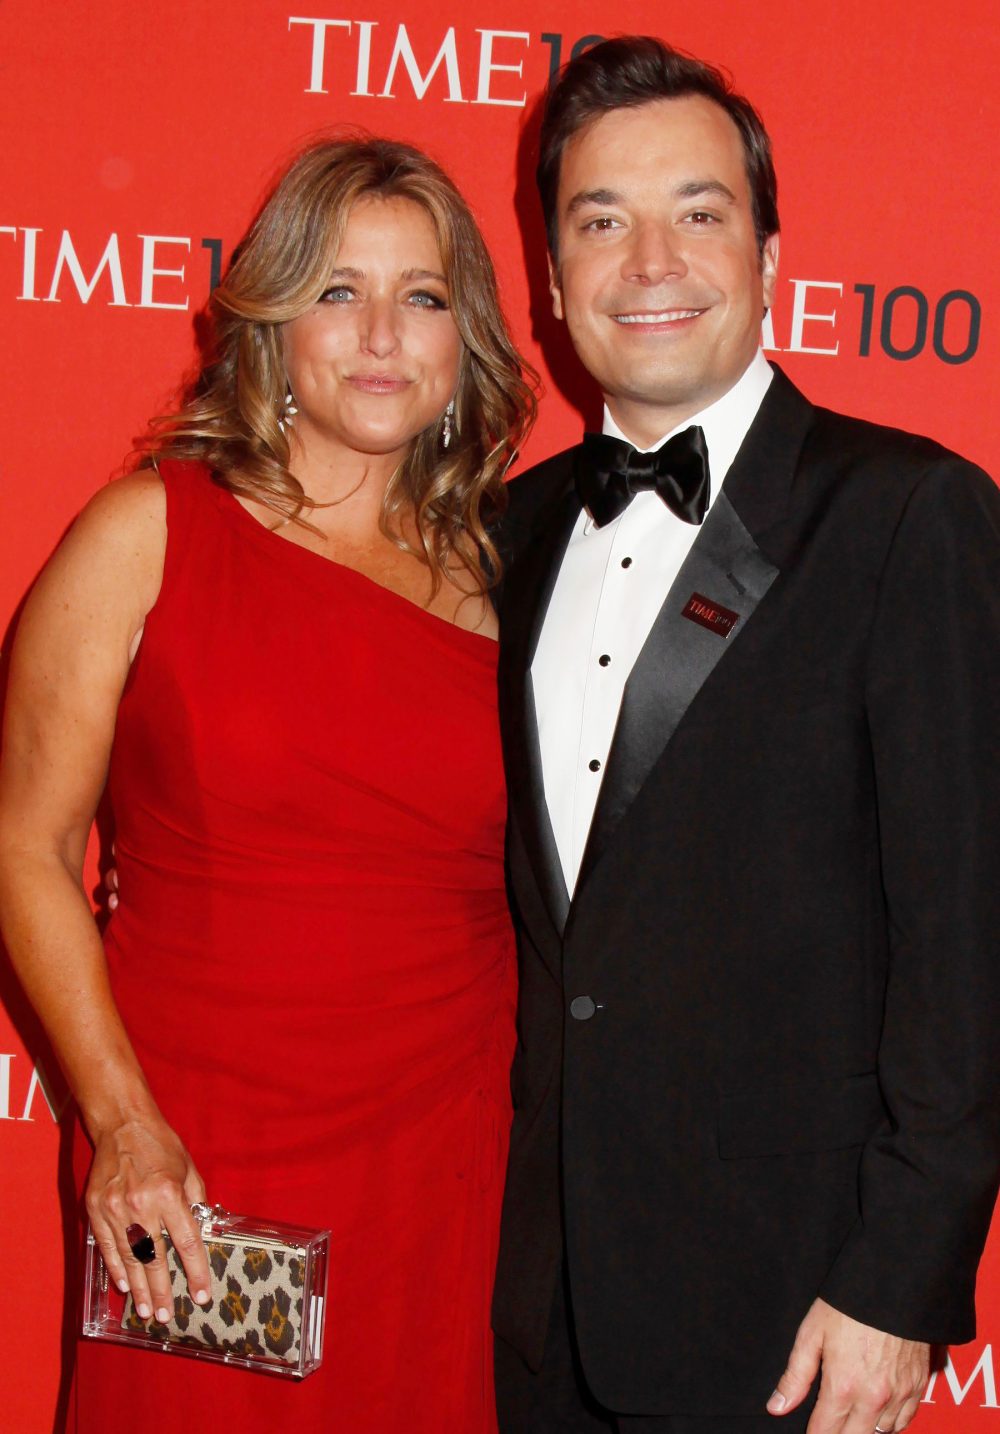 Jimmy Fallon and Wife Nancy Juvonen Recall the ‘Magic’ of Their First Meeting More Than 10 Years After They Wed